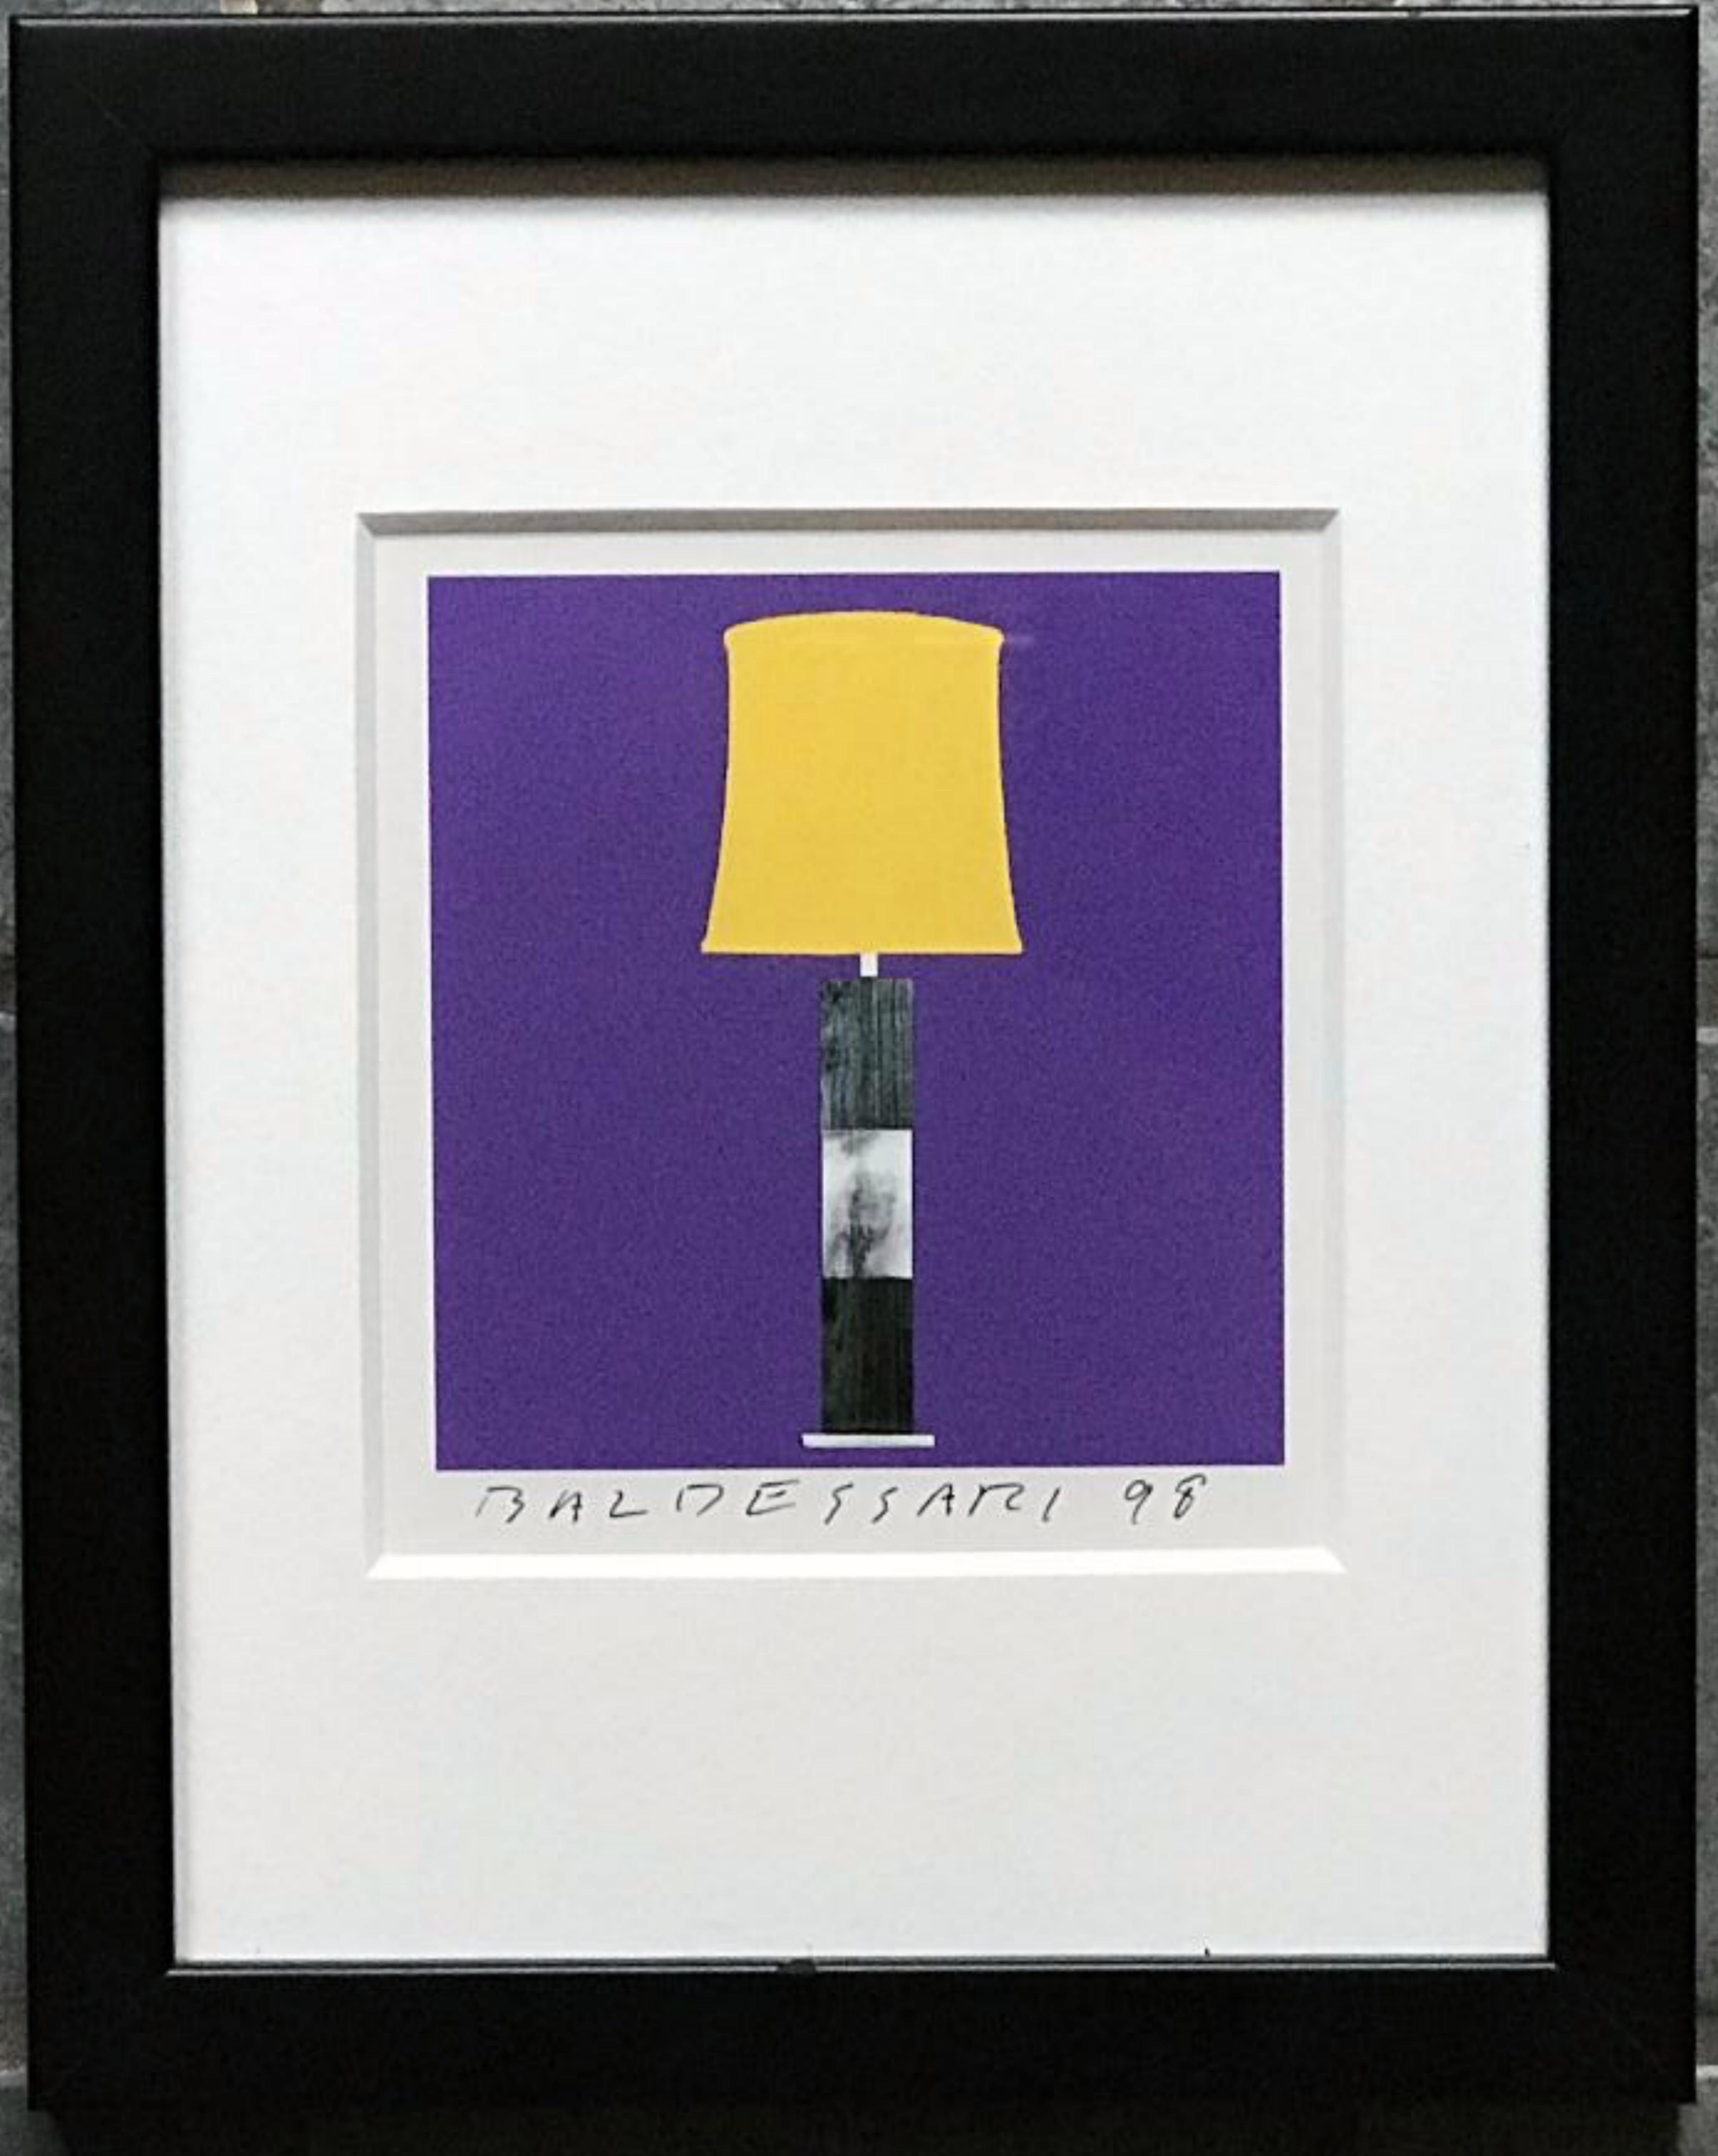 JBCRIAL1VY-98, pencil signed edition unique variant featured in monograph Framed - Print by John Baldessari